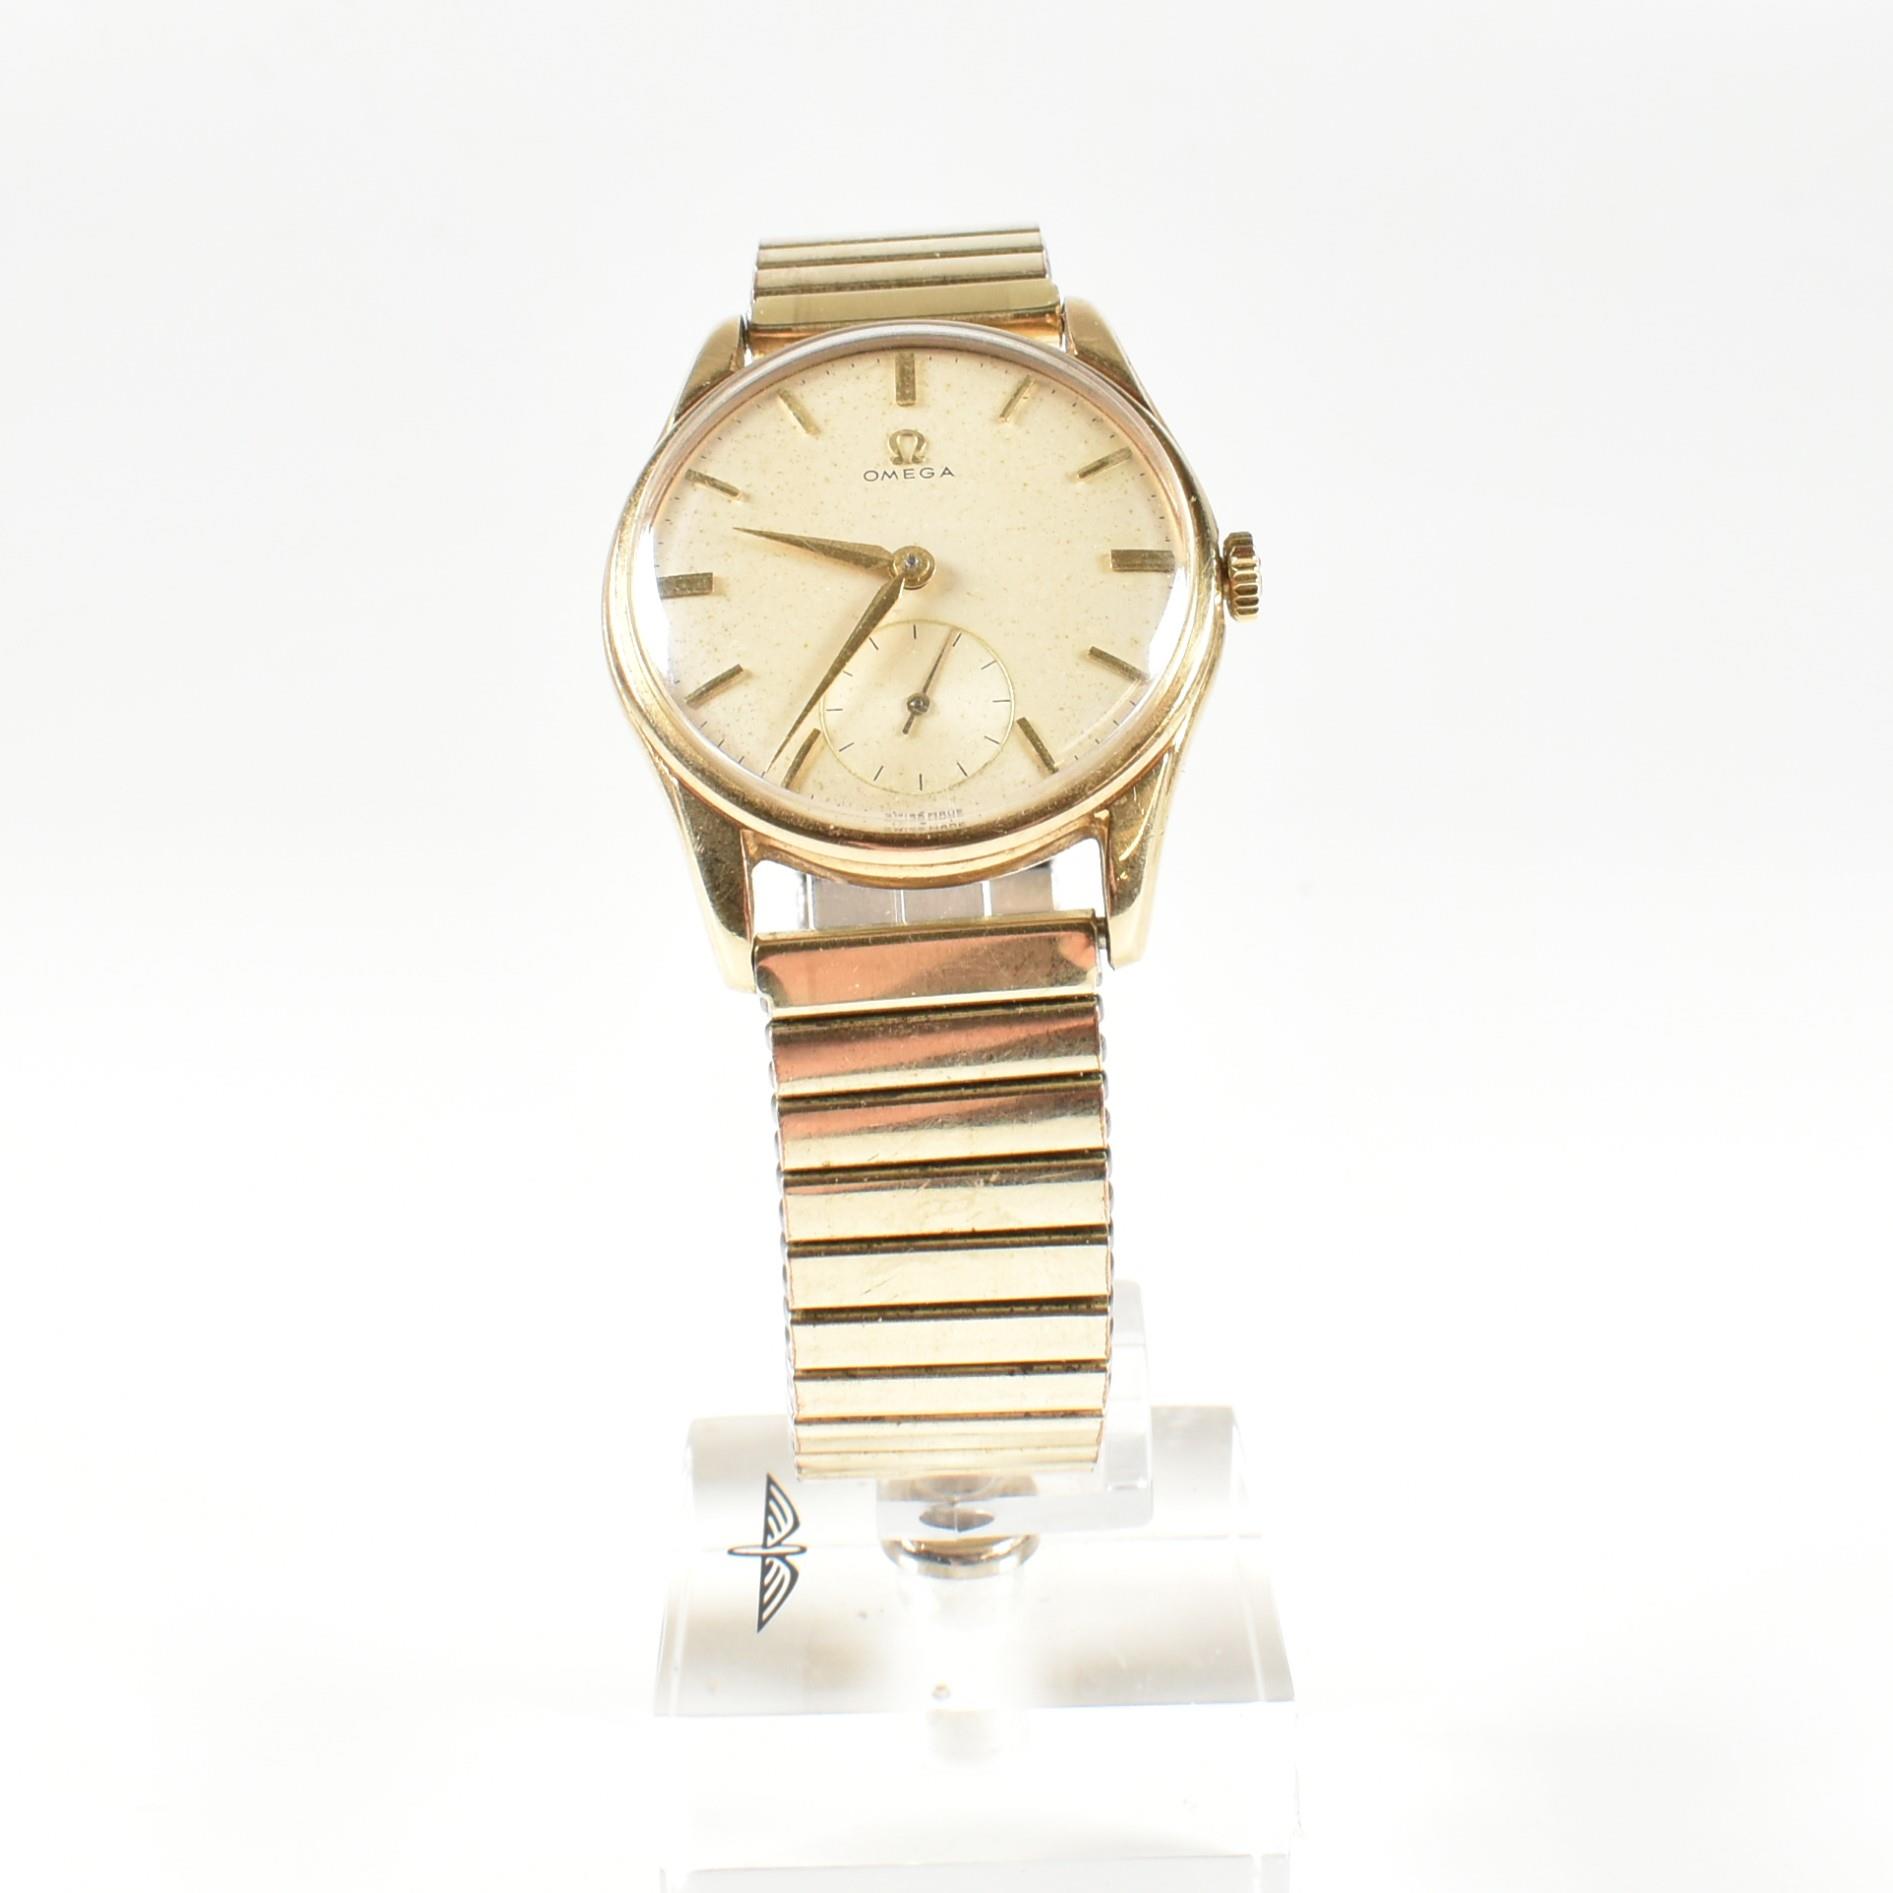 1960S 9CT GOLD OMEGA GENTLEMANS WRISTWATCH - Image 5 of 7